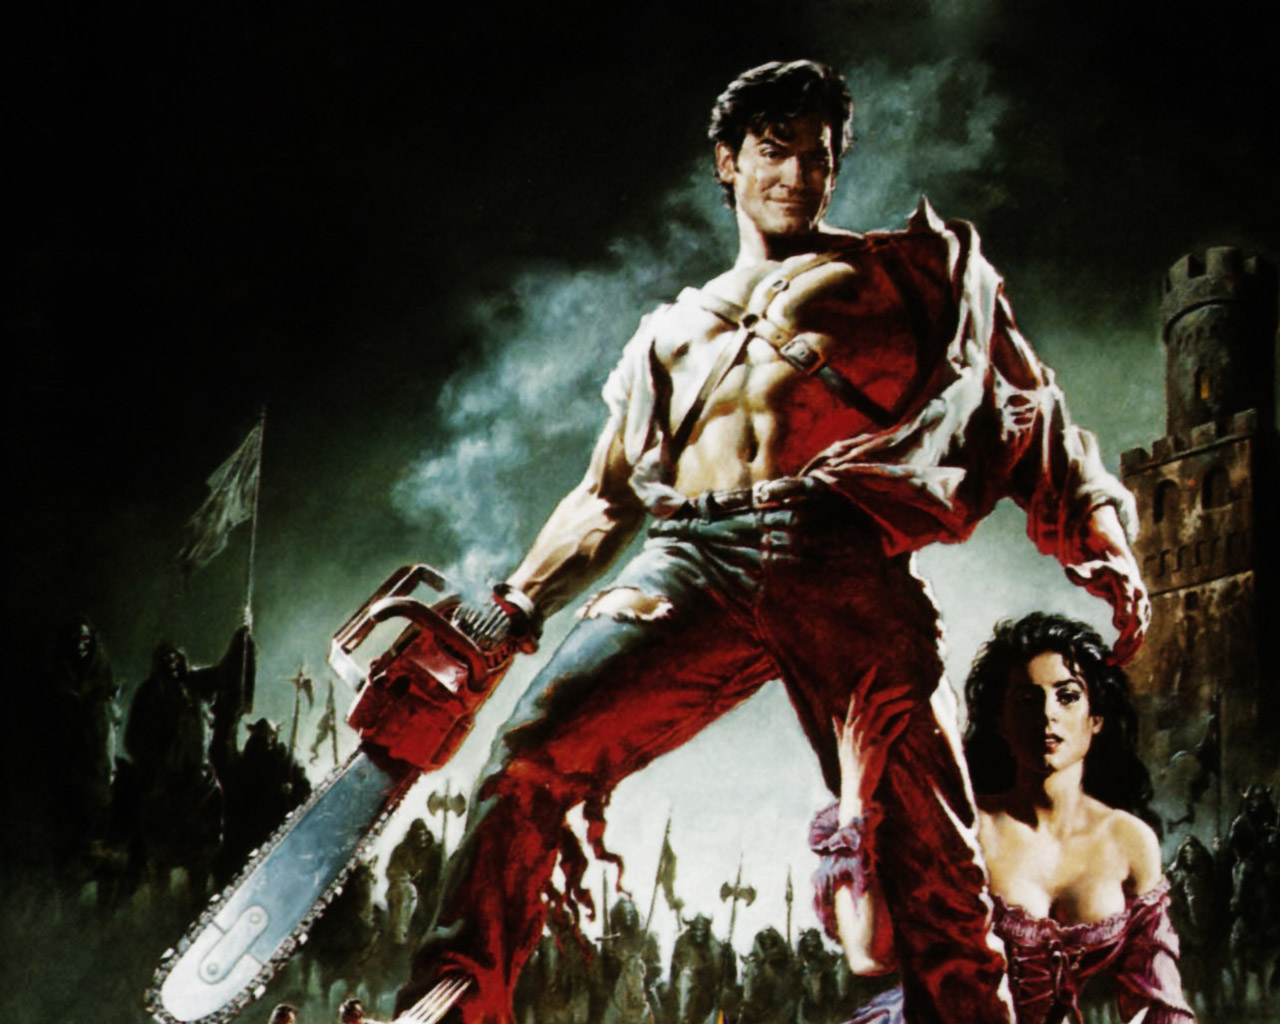 Army of Darkness 